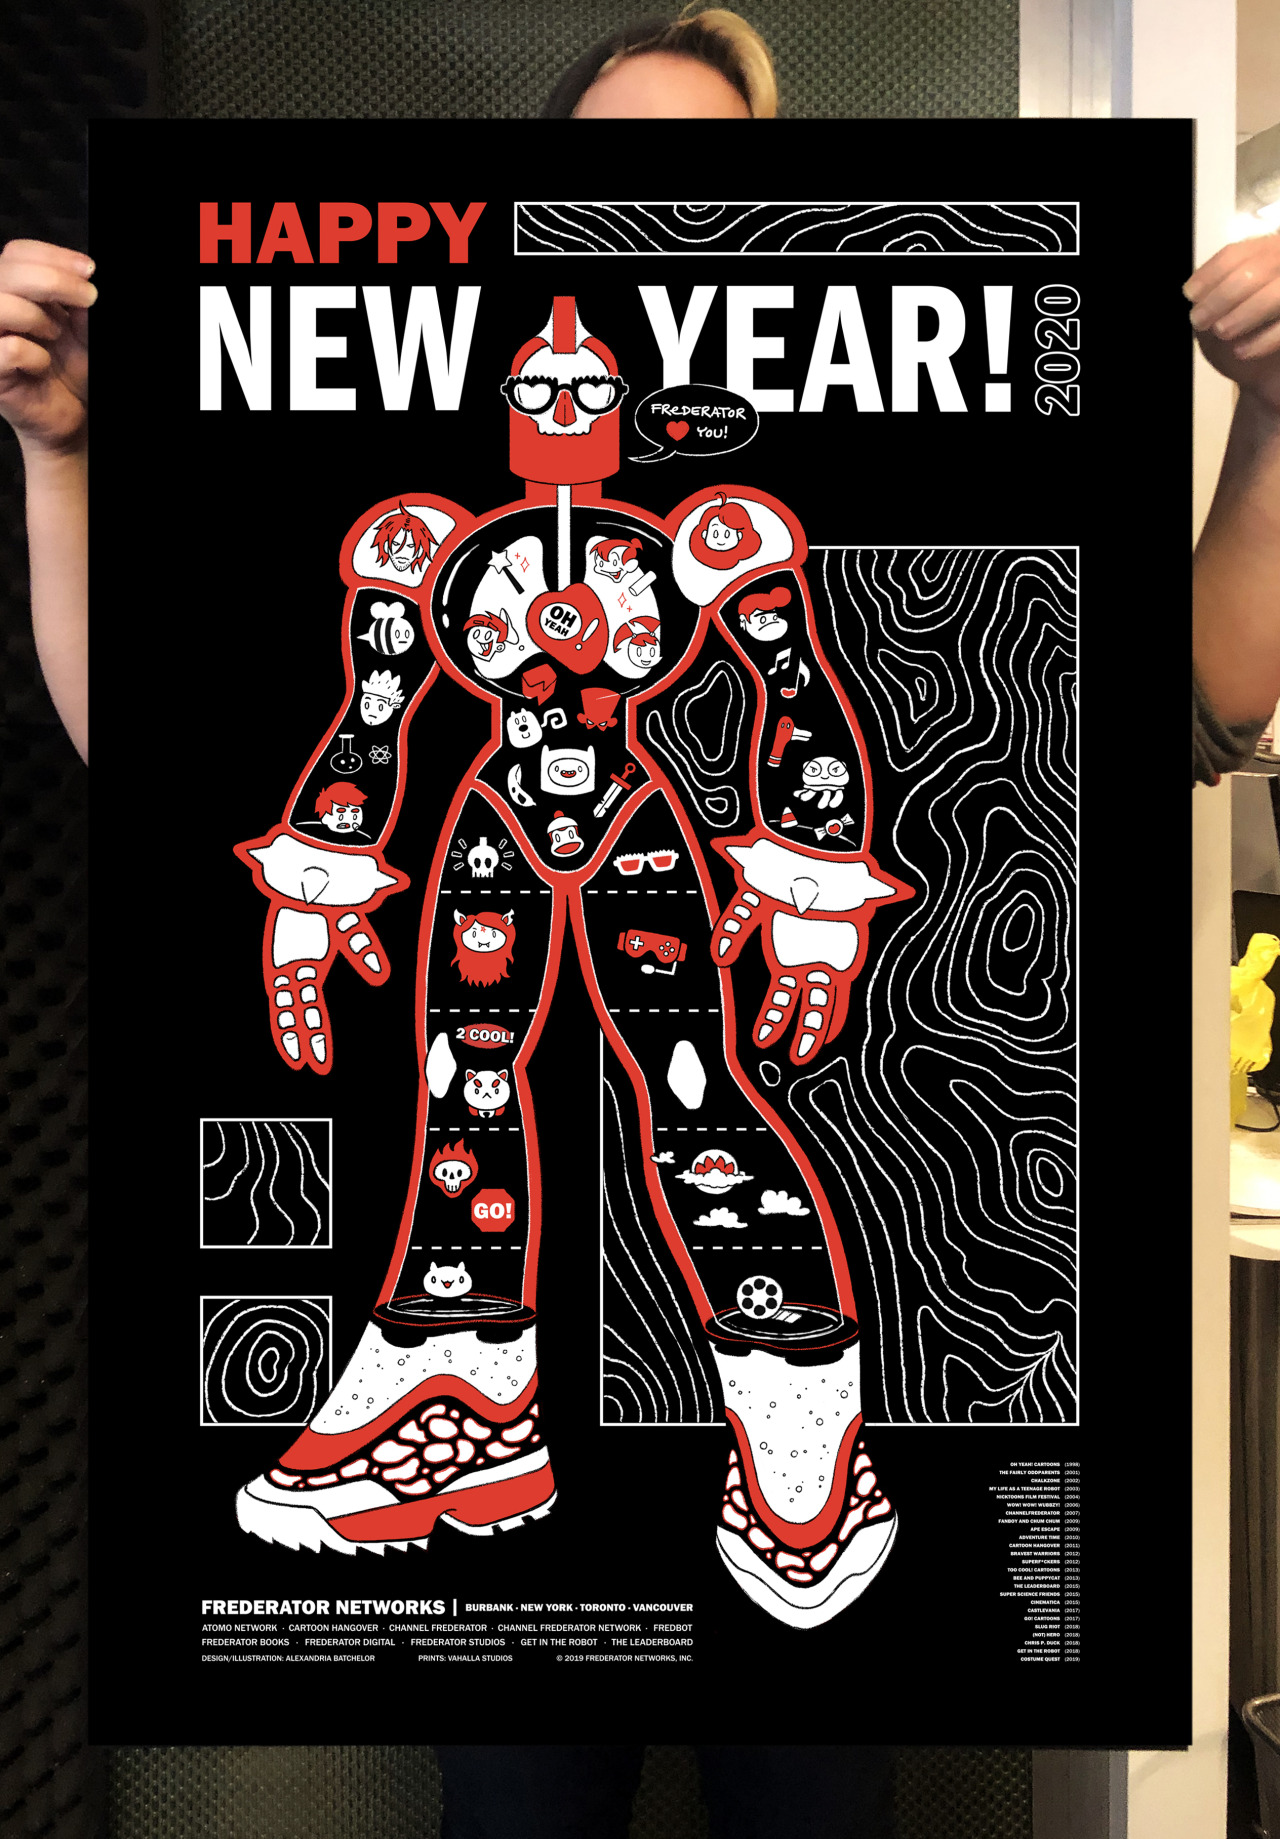 fred-frederator-studios:
“ Happy New Year 2020 from Frederator!
“ Illustration & Design by Alexandria Batchelor
Prints by Valhalla Studios
A limited edition New Year poster from Frederator
…..
Frederator Loves You!
Happy New Year! 2020
FREDERATOR...